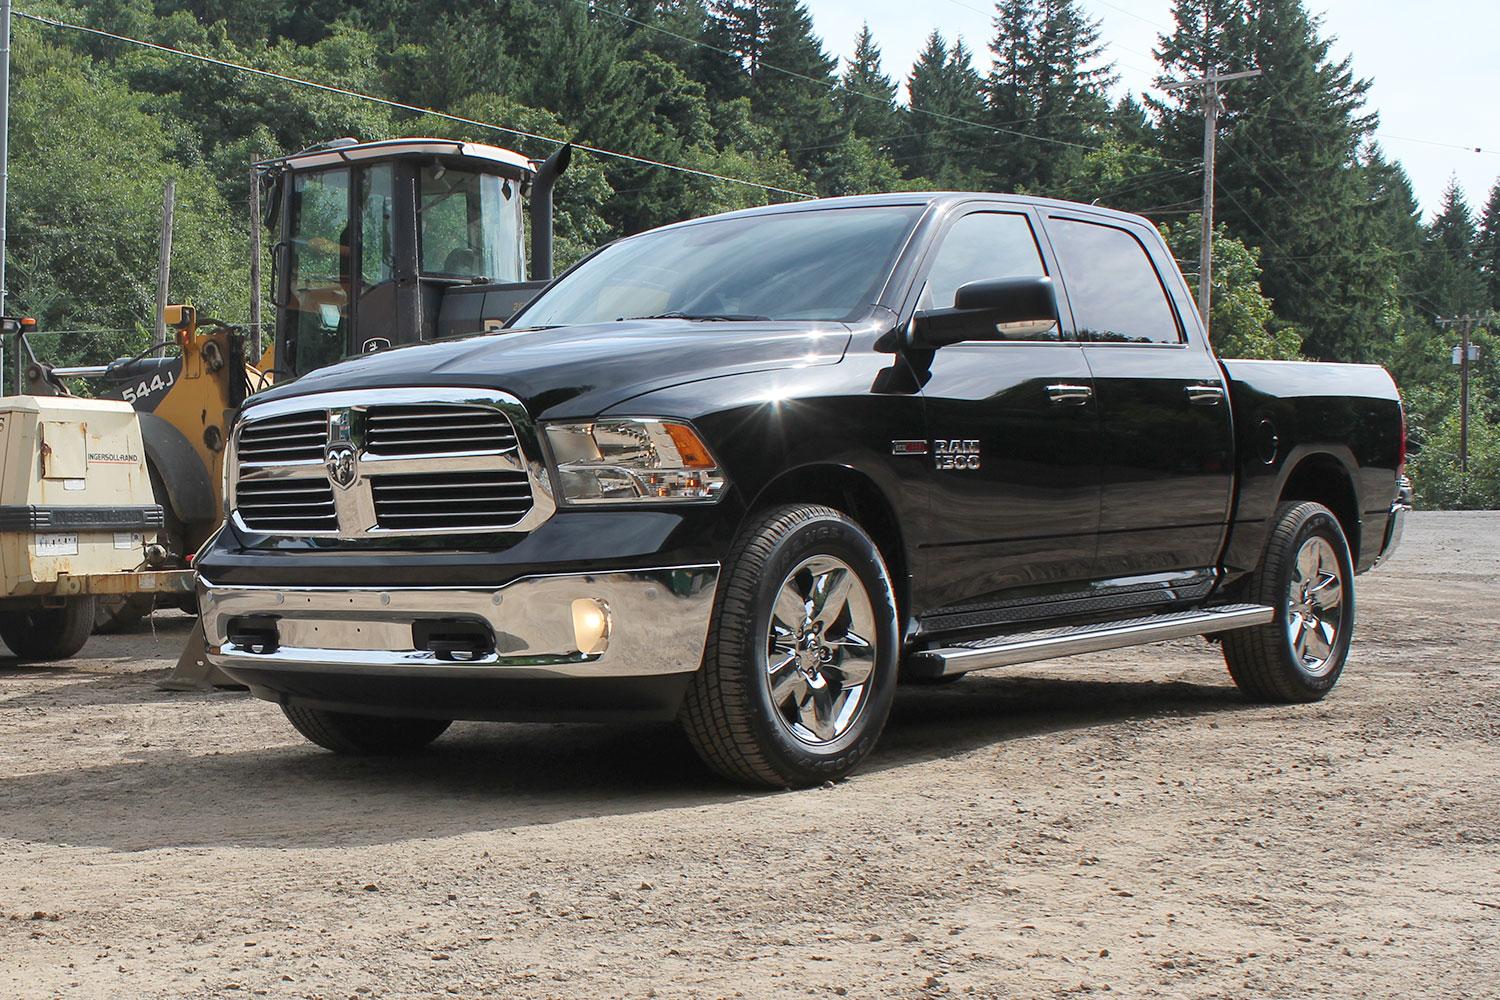 Common Ram L EcoDiesel V6 Problems You Should Know About